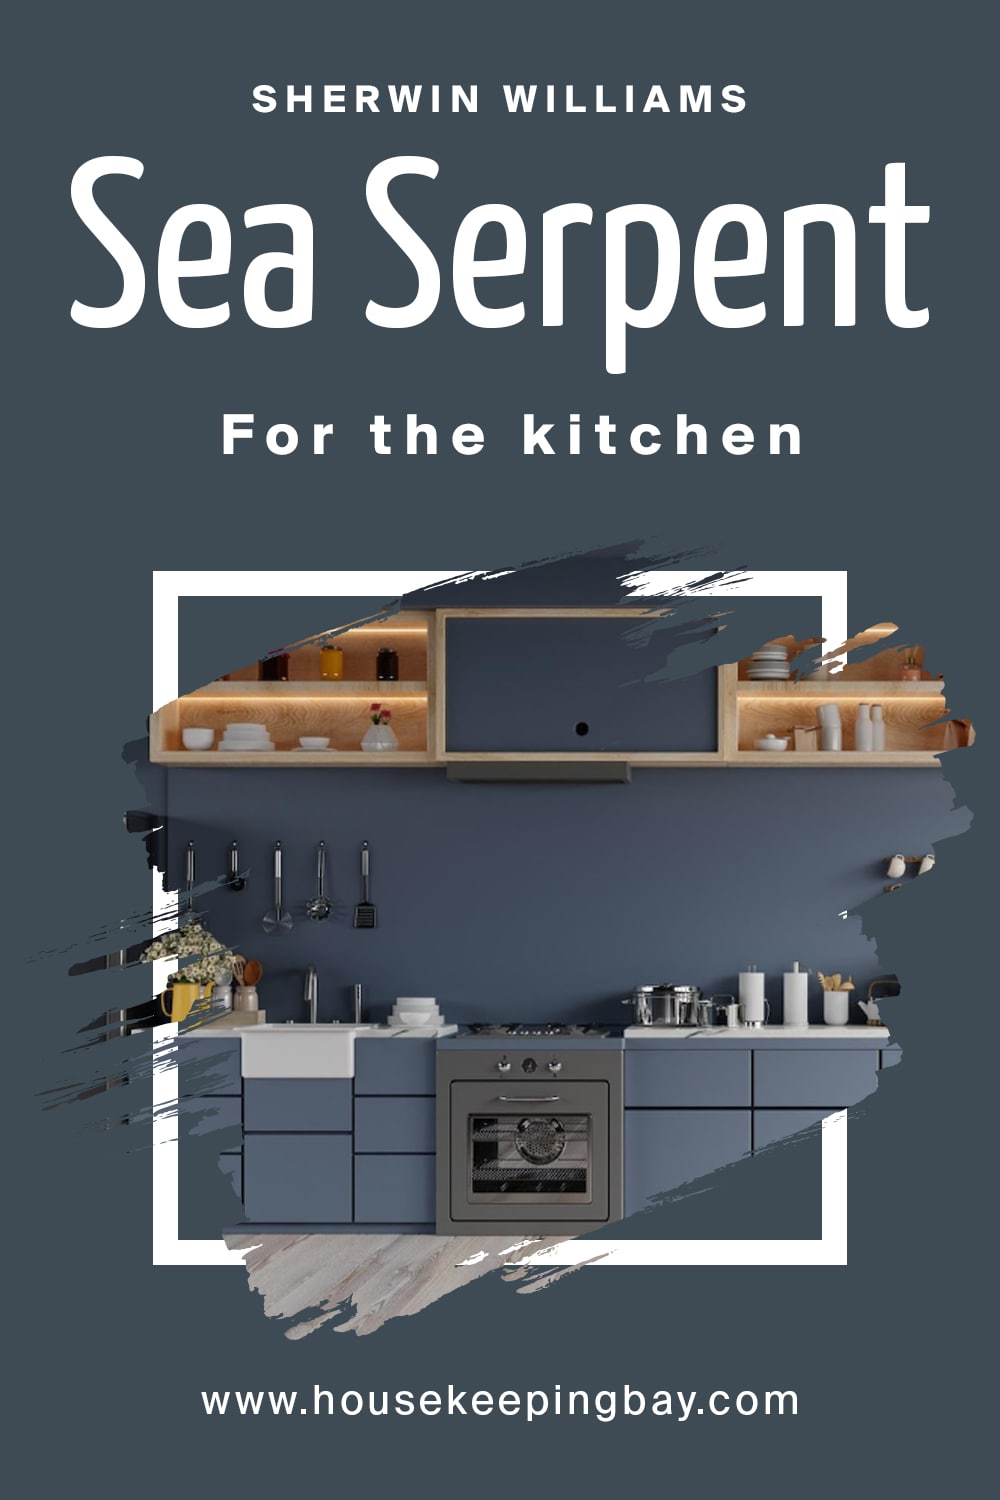 Sherwin Williams. Sea Serpent For the kitchen